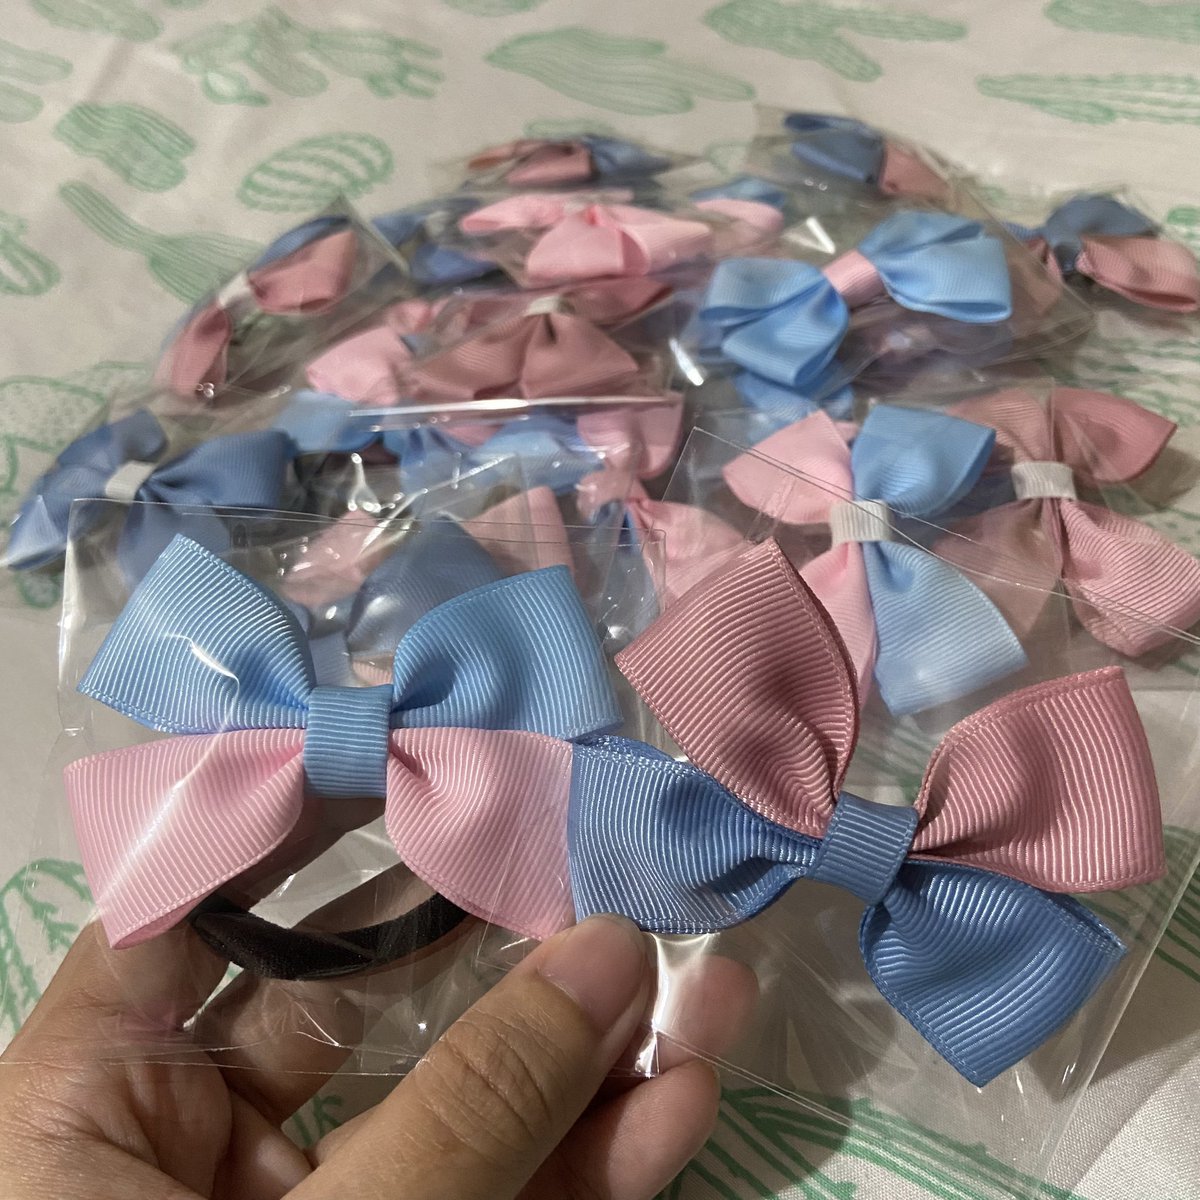 wts lfb ph

Hair Ribbons 🎀 
-good for freebies, giveaways, personal use ❤️

15php each only

Dm for inquiries
#IVEinMANILA #ITZY_BORNTOBE_MANILA #NCTDREAMinMANILA #NCTDREAM_THEDREAMSHOW3 #BENCHandENHYPEN #2024SUHOASIATOUR  #OnewinManila #BINIverse #2024_ZEROBASEONE_THEFIRSTTOUR